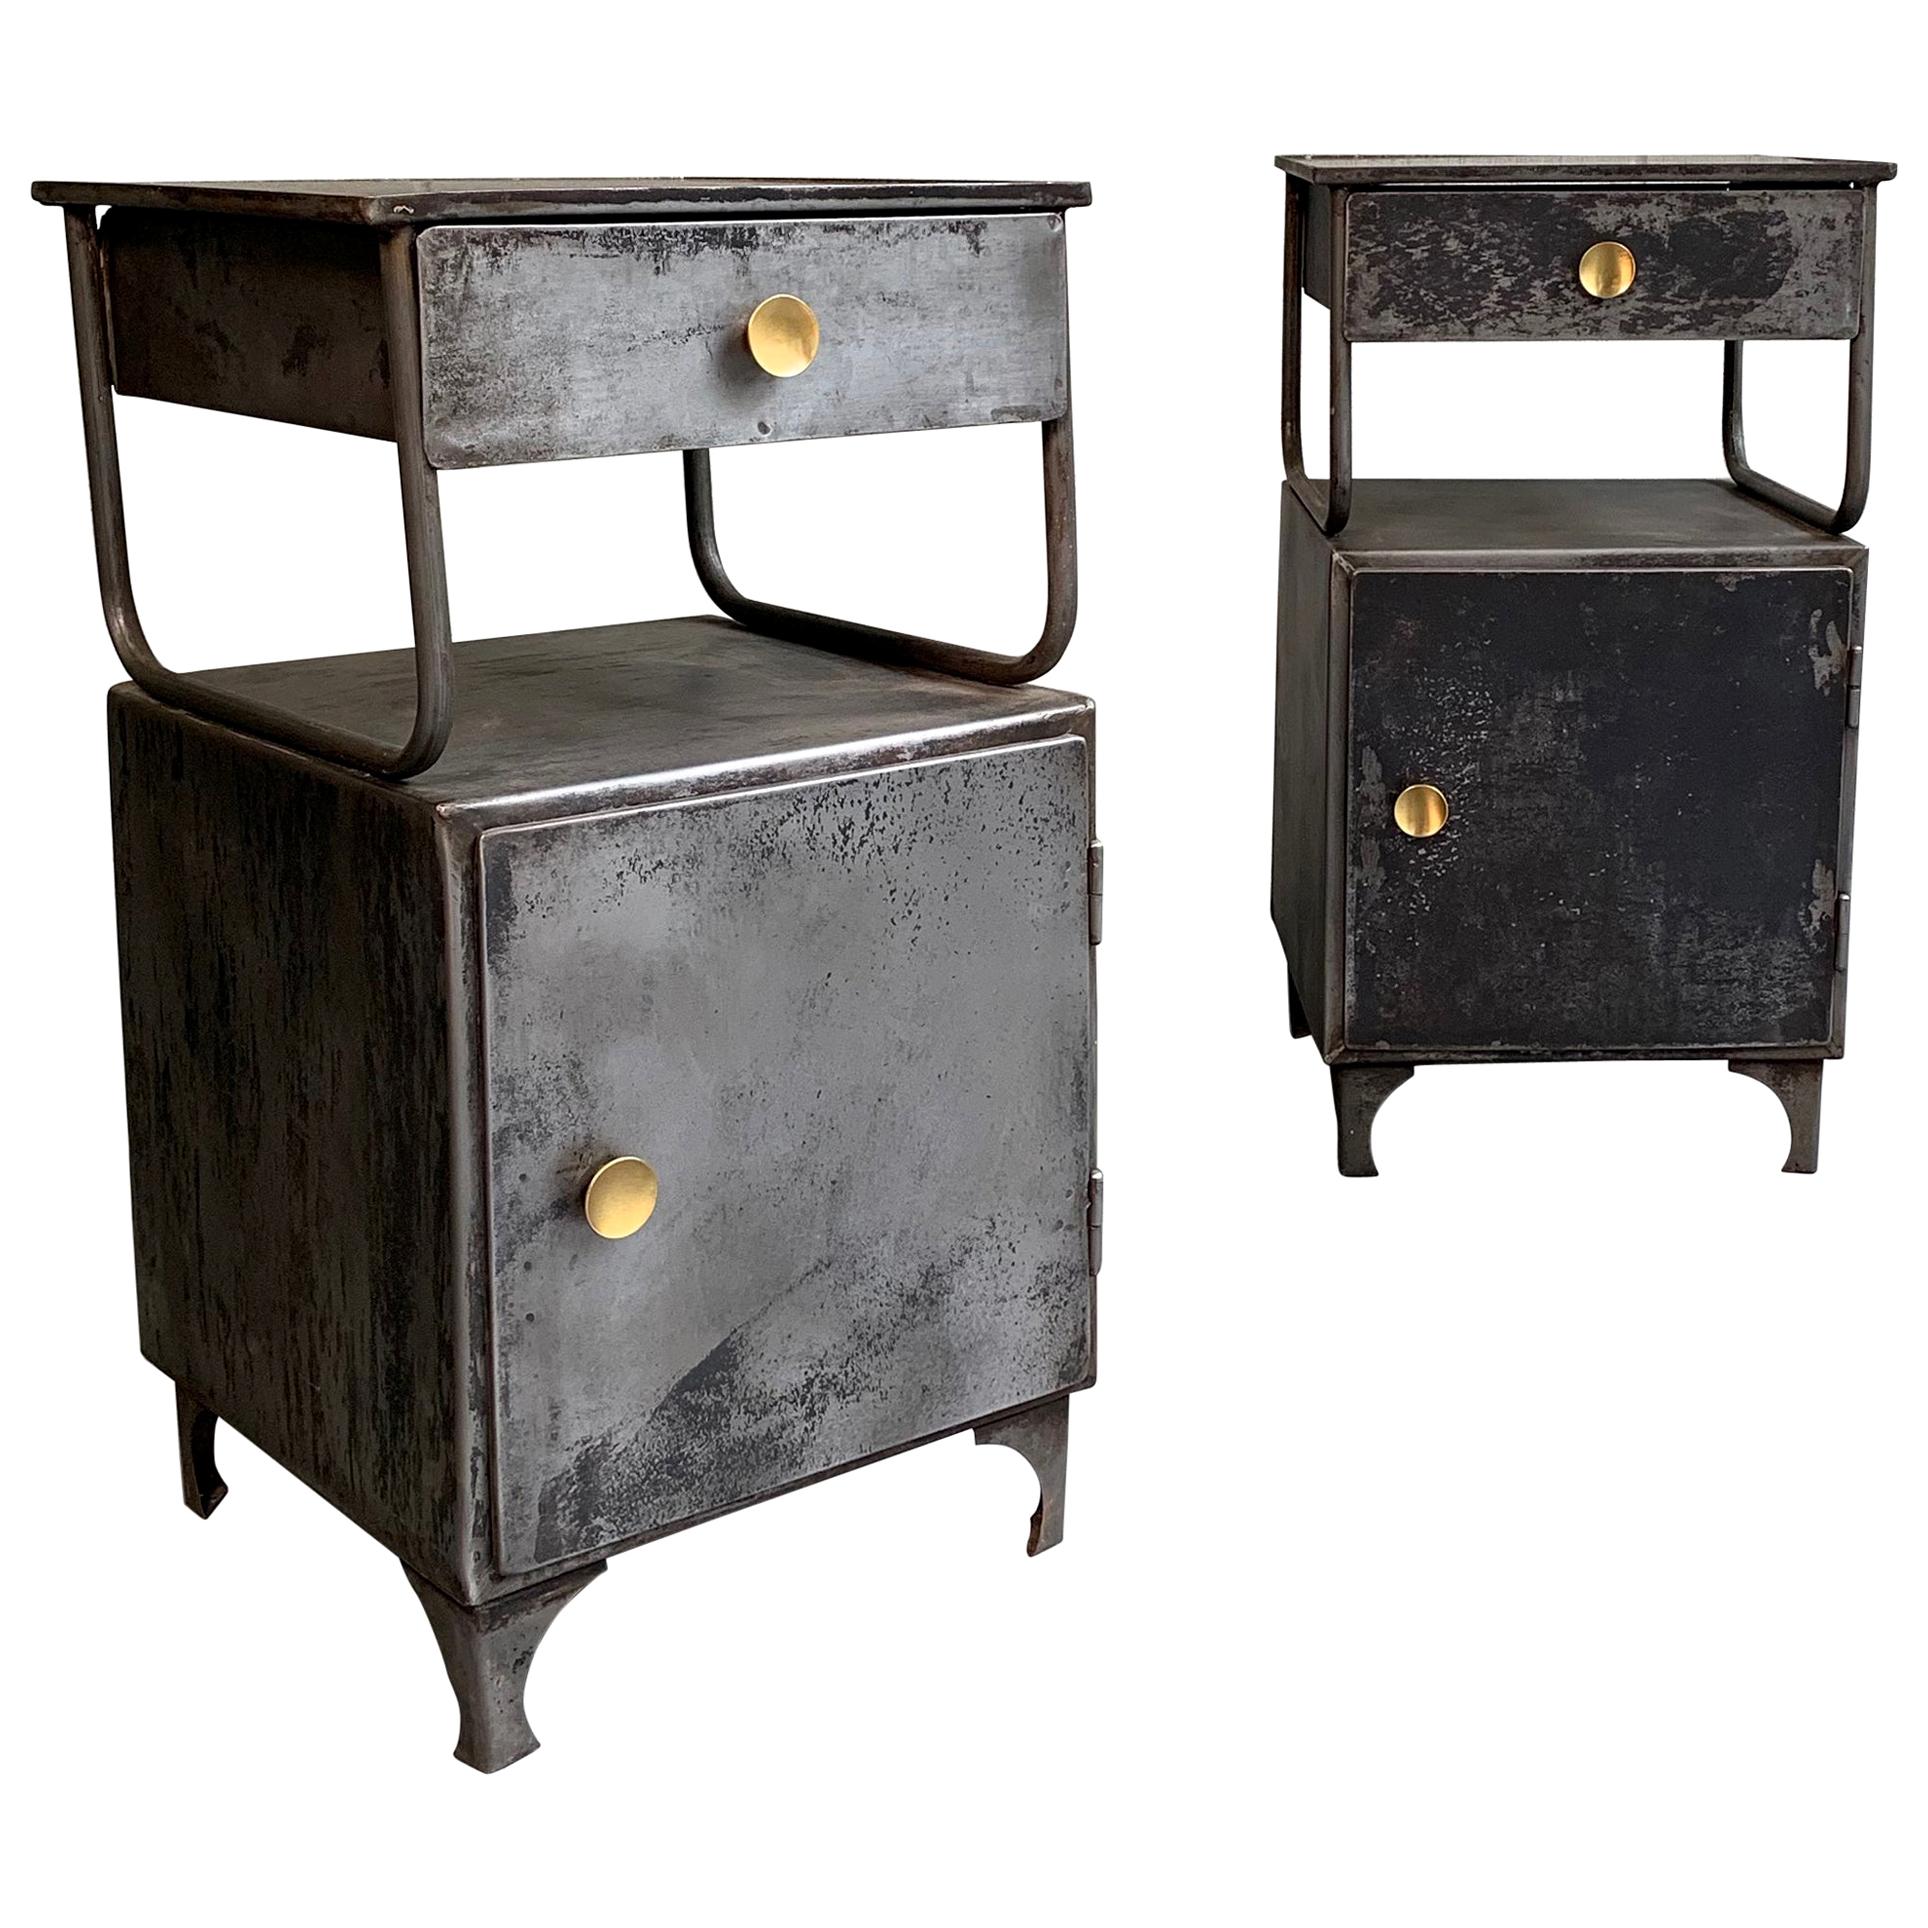 Industrial Brushed Steel Hospital Nightstand Cabinets